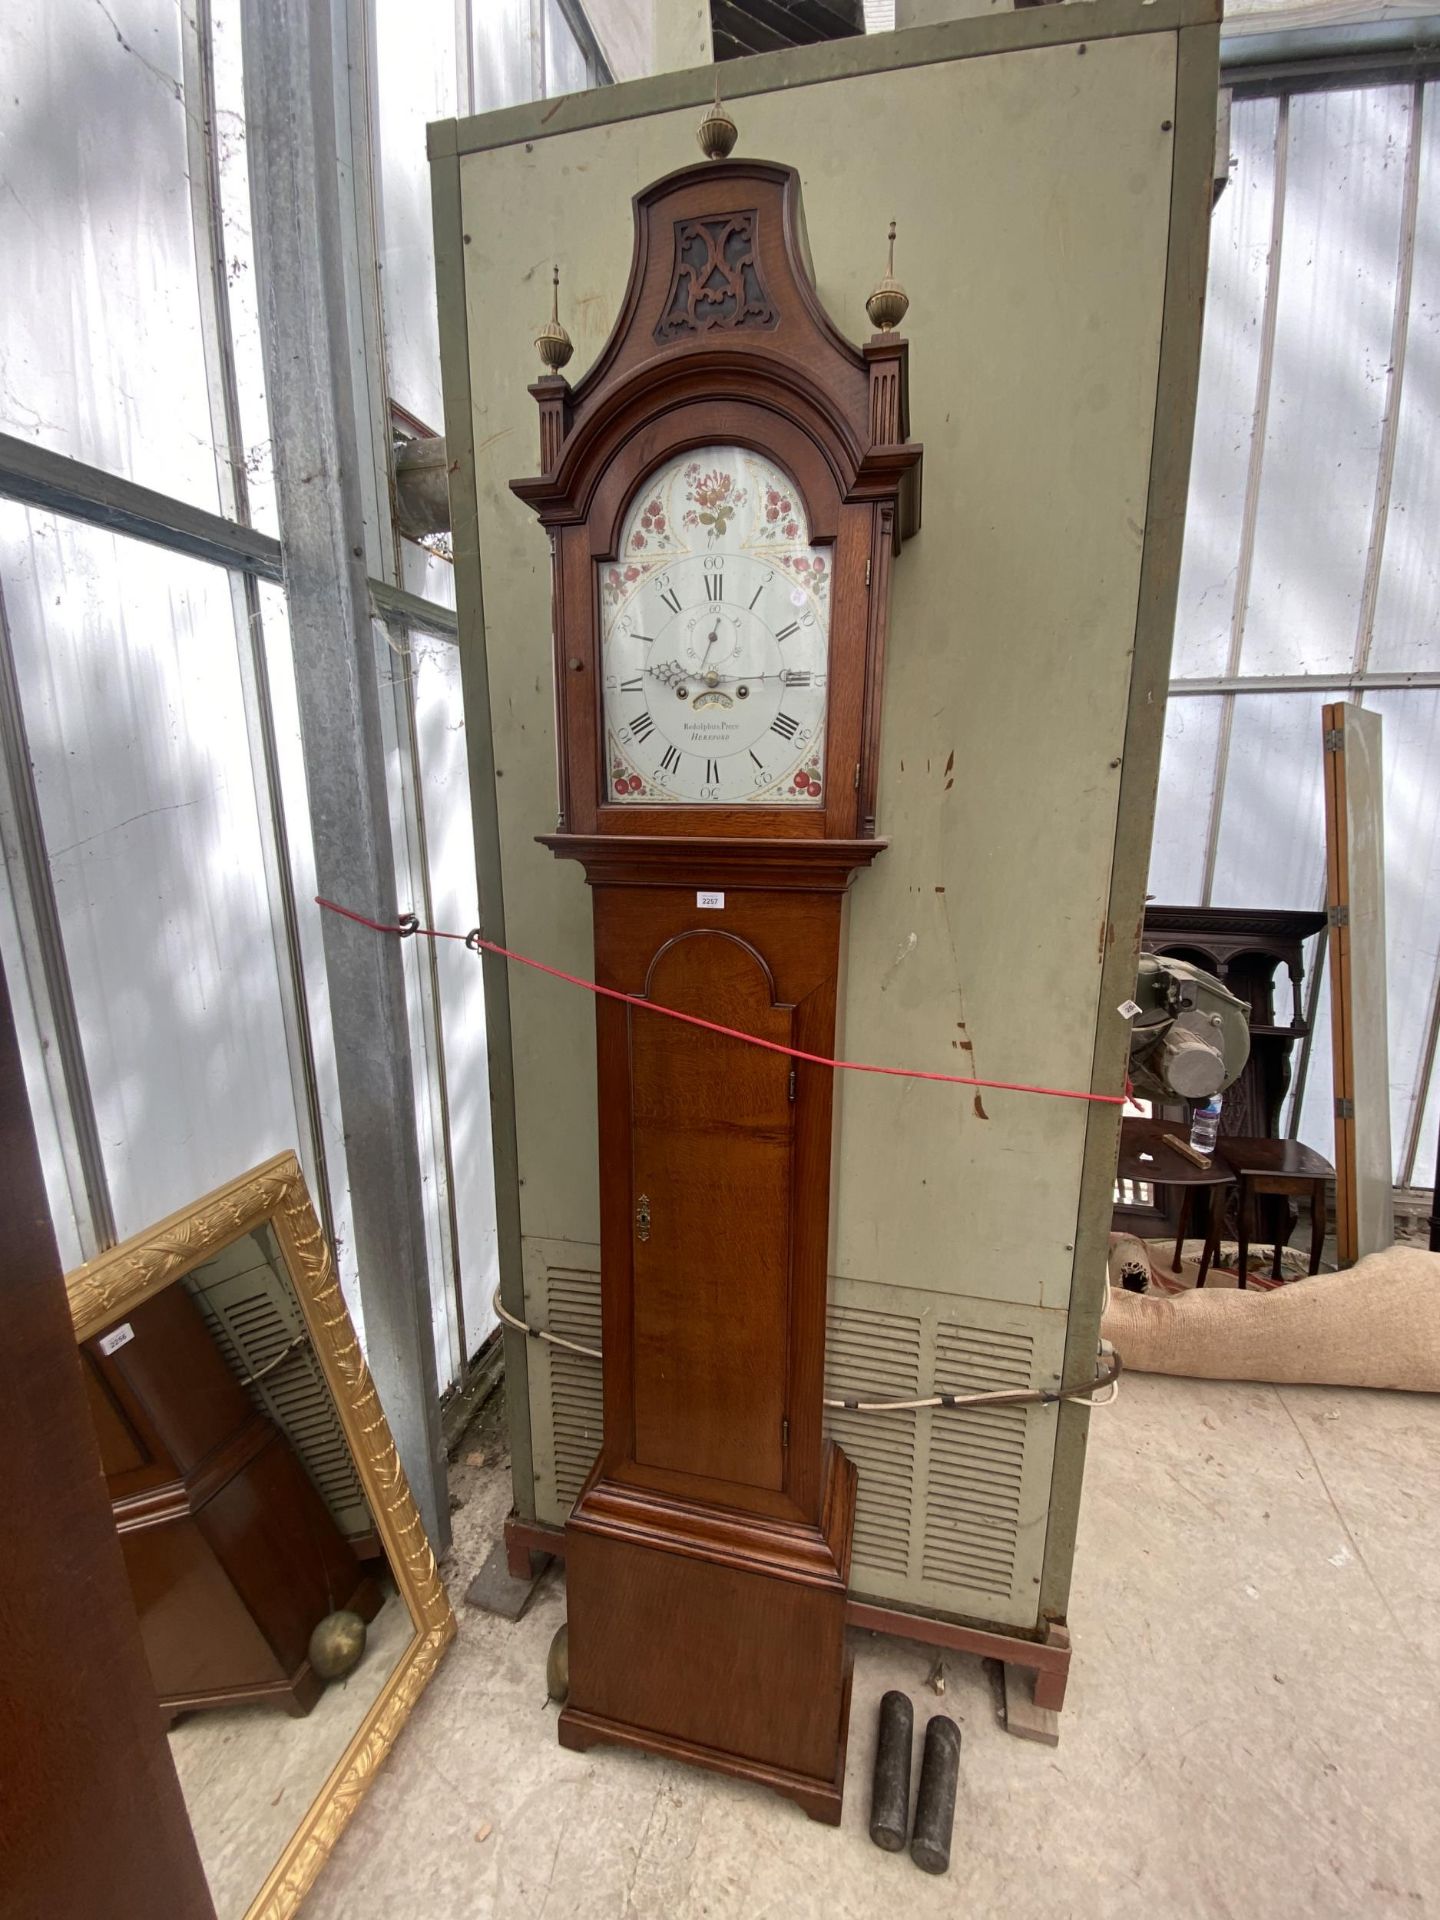 A 19TH CENTURY OAK EIGHT-DAY LONGCASE CLOCK WITH PAINTED ENAMEL FACE BY REDOLPHUS PRECE, HEREFORD